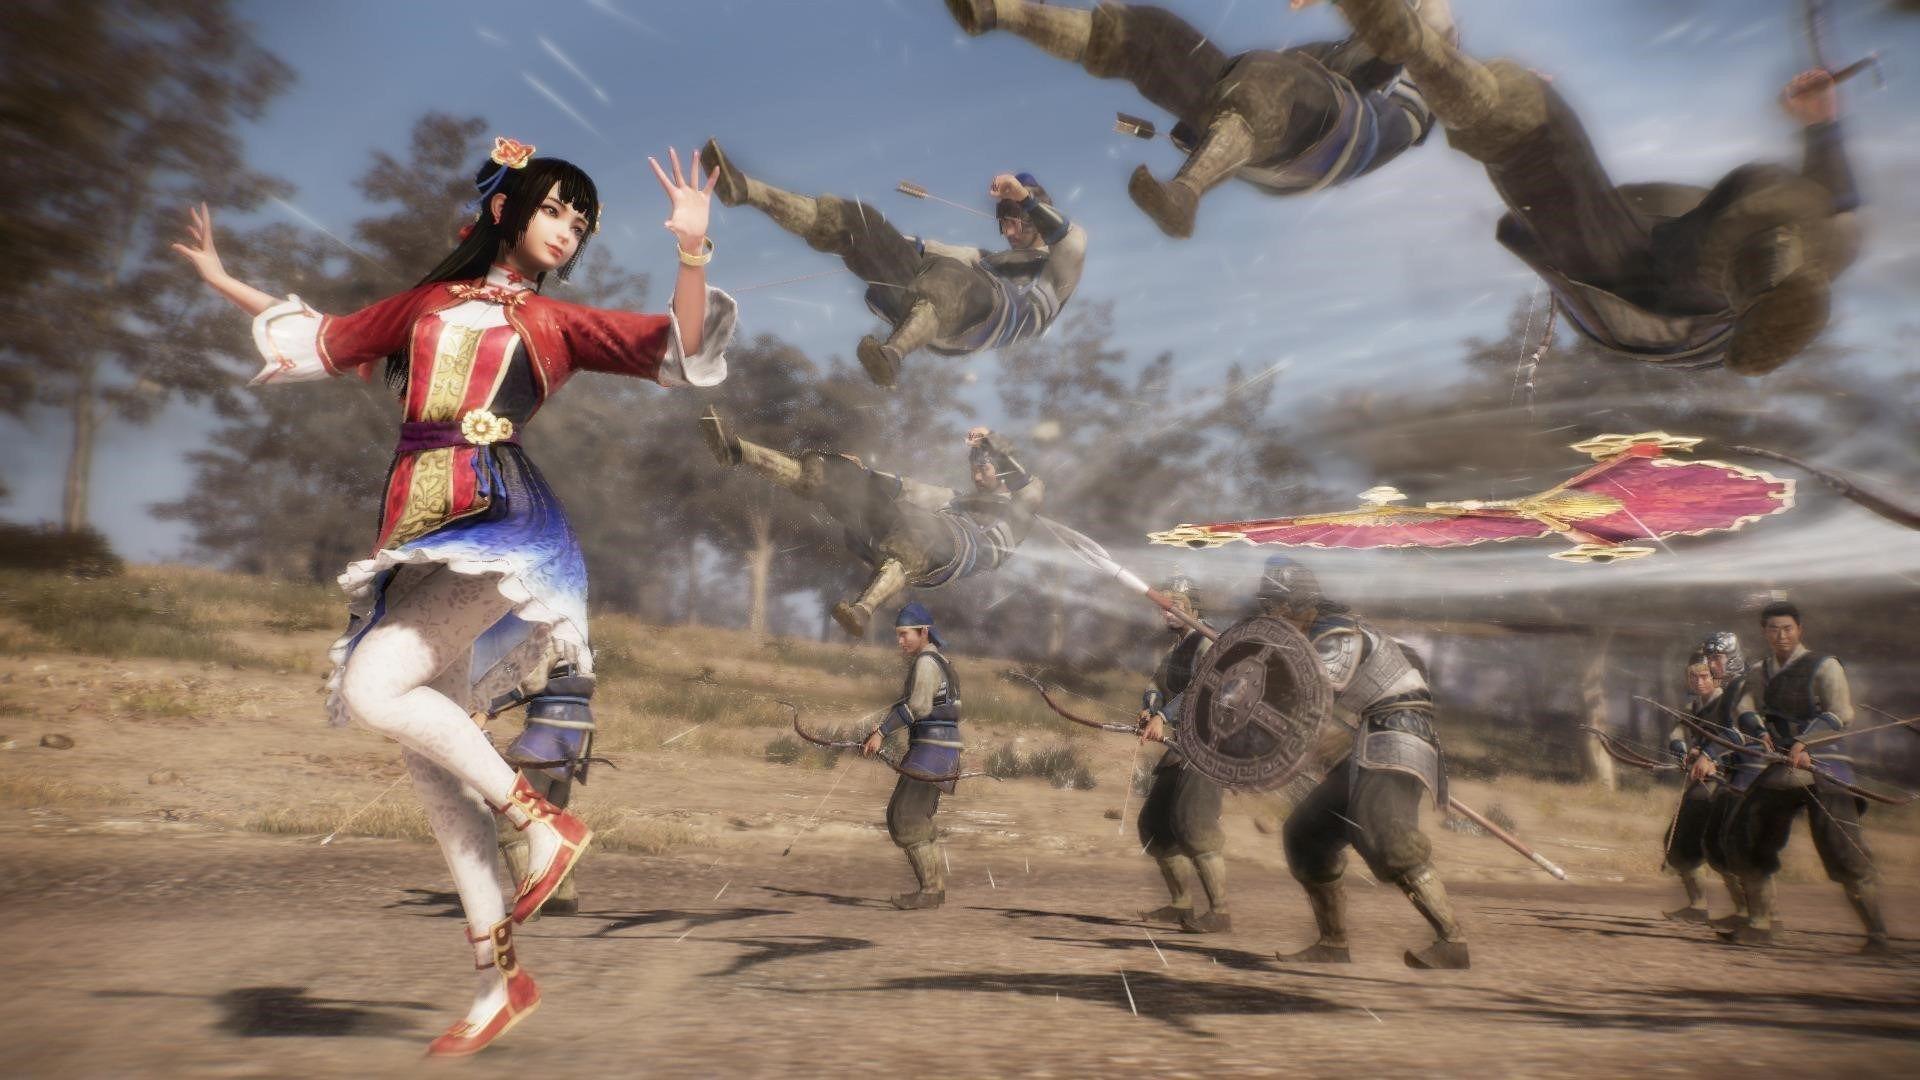 The third trailer Dynasty Warriors 9Game playing info